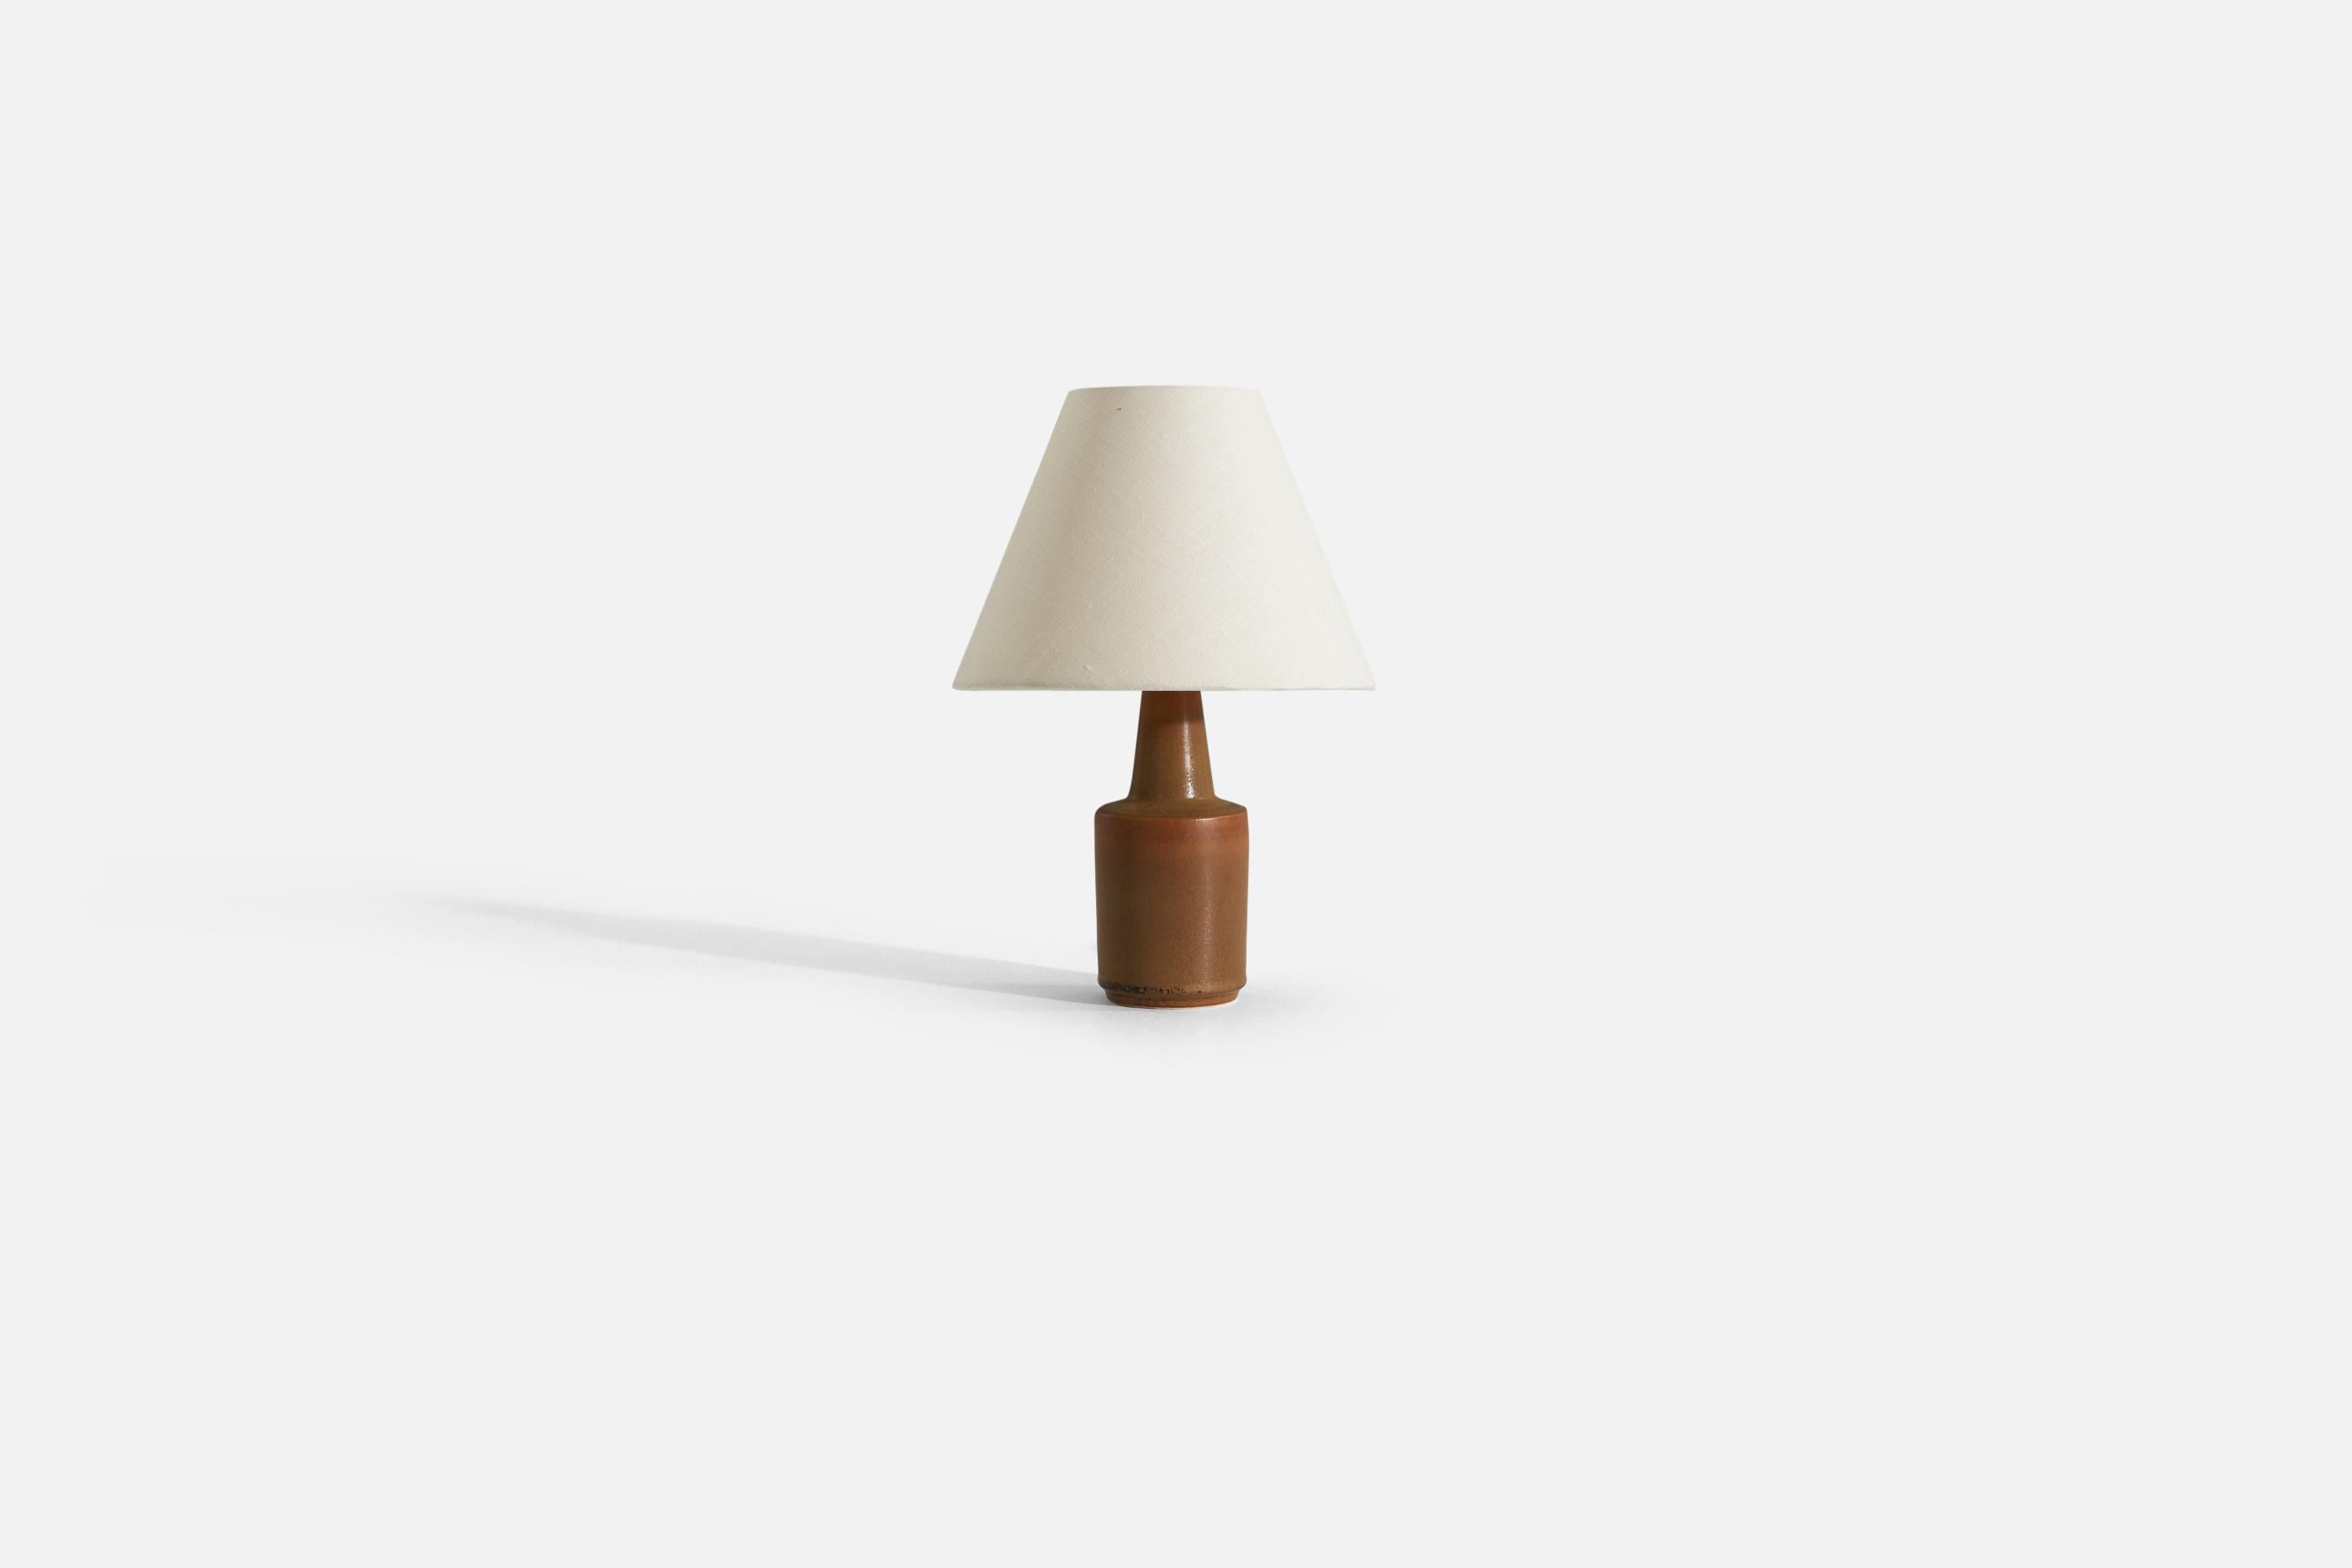 A brown-glazed stoneware table lamp produced by Søholm Stentøj, Bornholm, Denmark, in the 1960s.

Sold without lampshade. 

Measurements listed are of lamp. 
Shade : 4 x 8.25 x 6.25
Lamp with shade : 12 x 8.25 x 8.25.